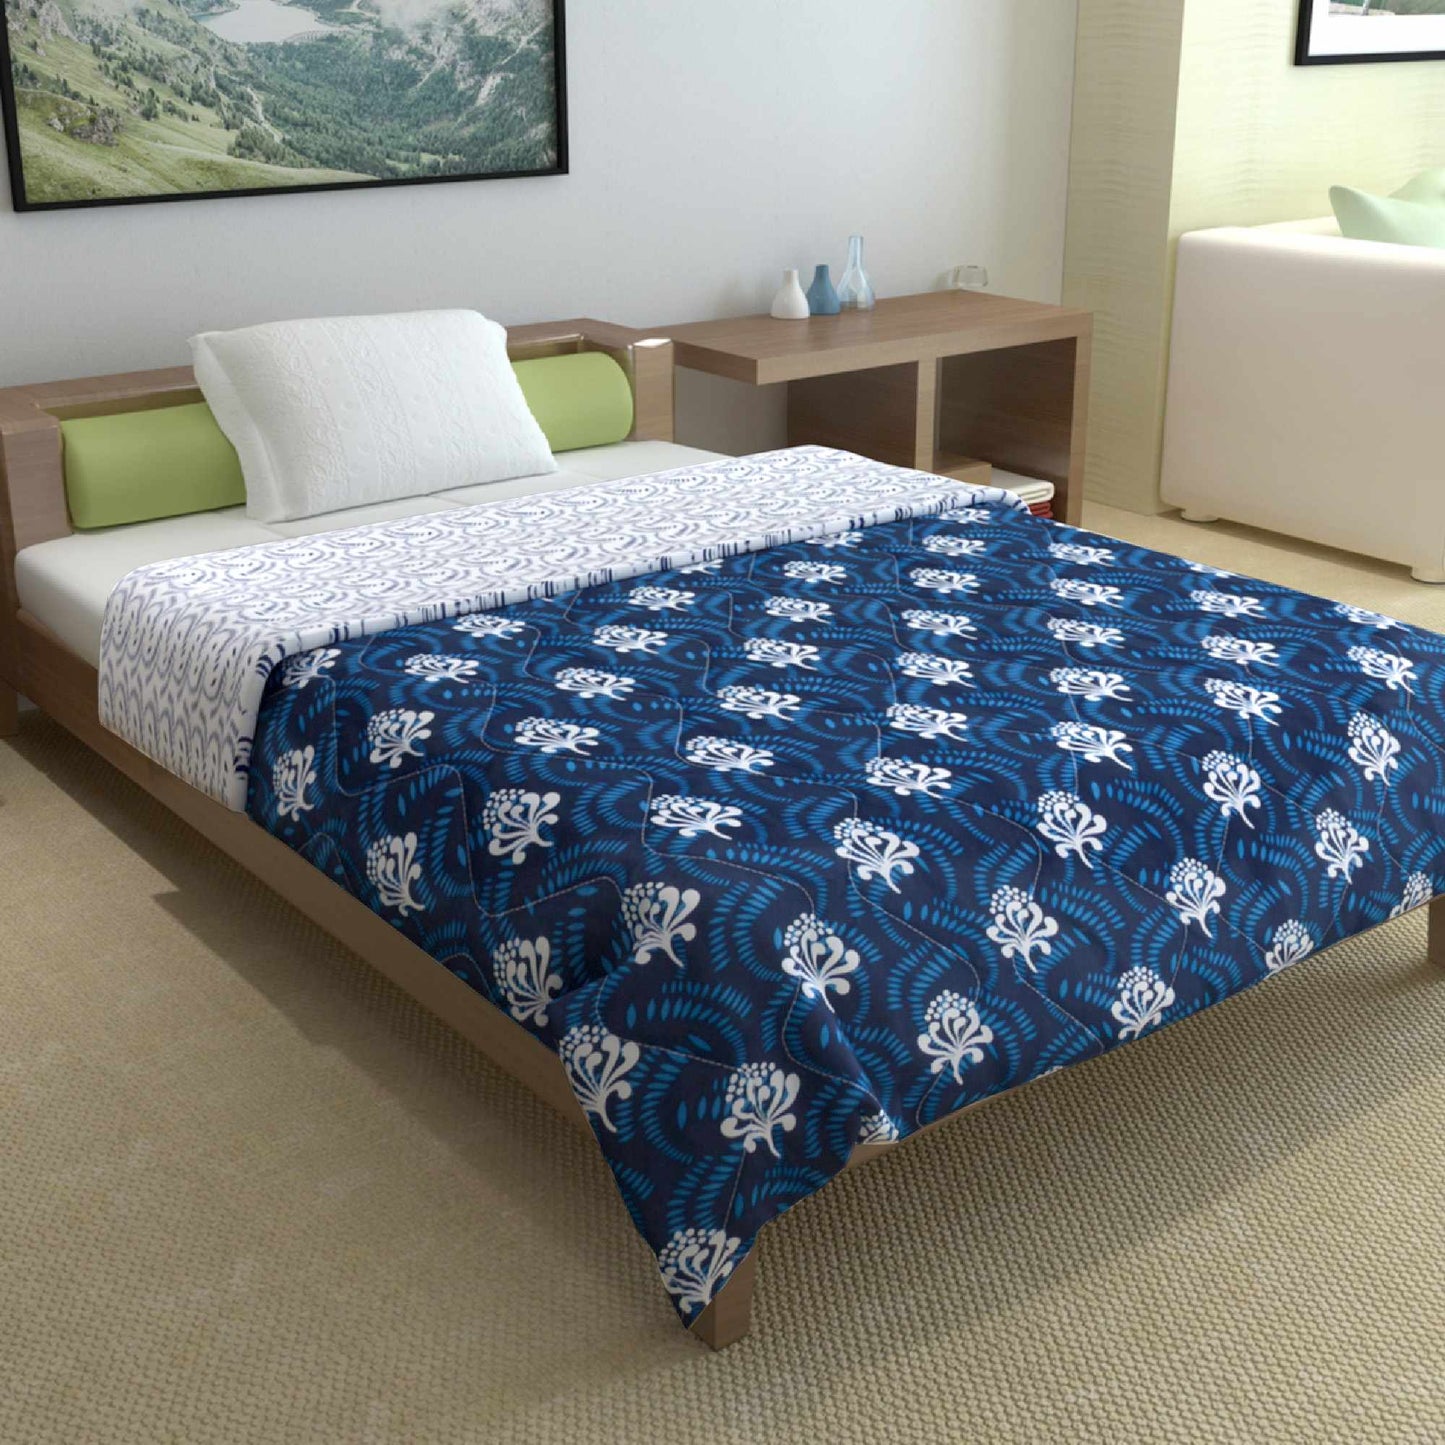 Iris Floral AC Quilt Comforter for Single Bed